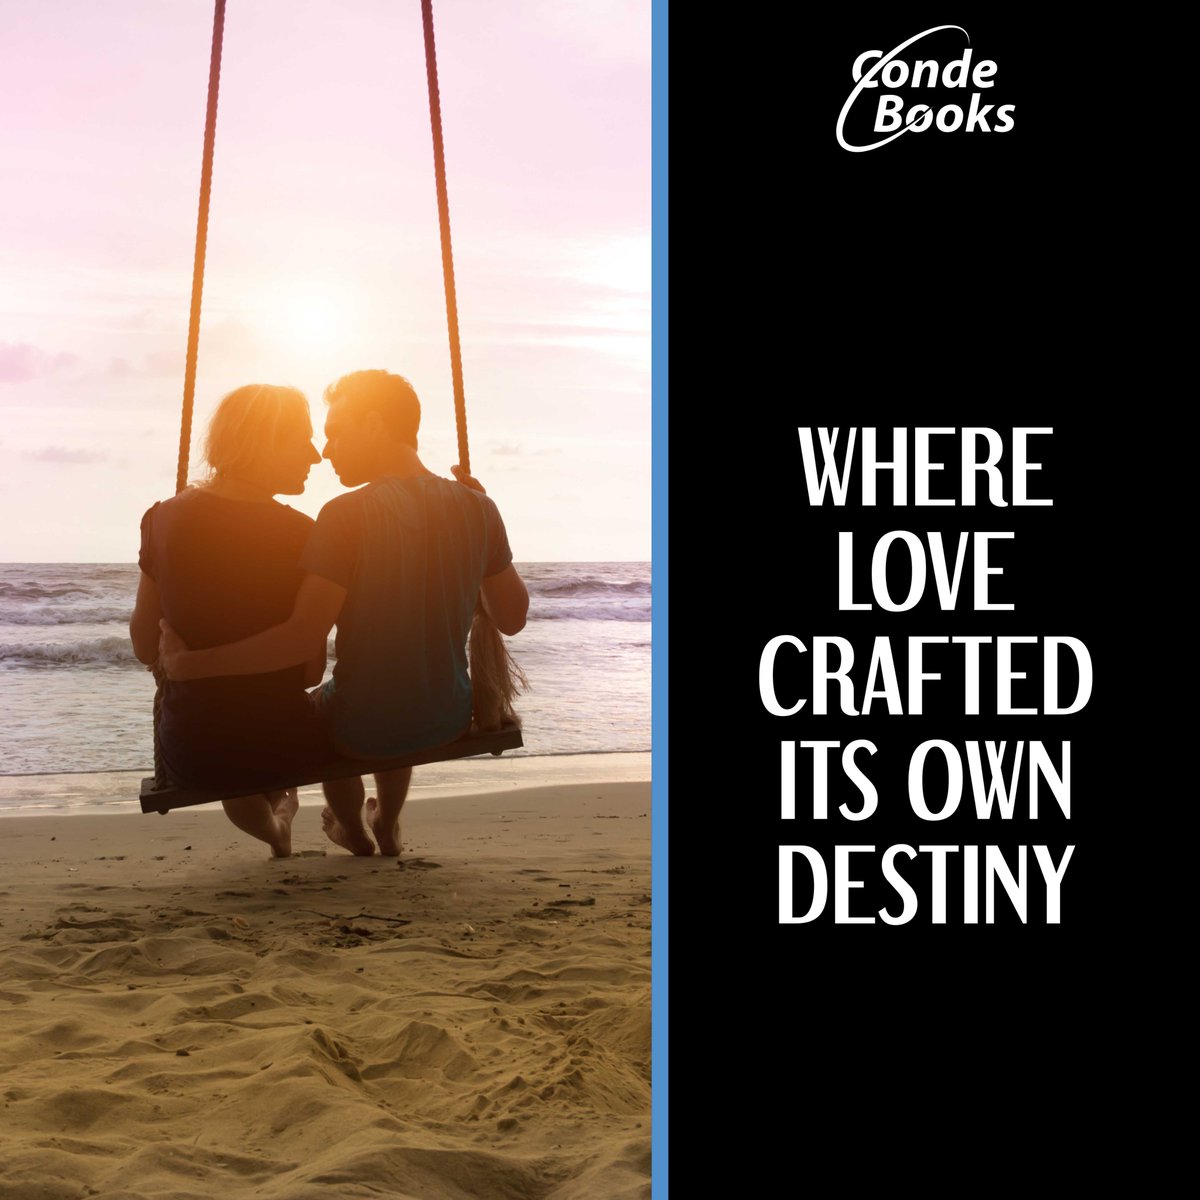 Dive into 'Aching Hearts' where love, like a master artisan, crafts its own destiny. Prepare to be spellbound by a tale where love is the author of its own fate.
a.co/d/5edhA5B
#LoveDestiny #HeartfeltJourney #UnforgettableRead